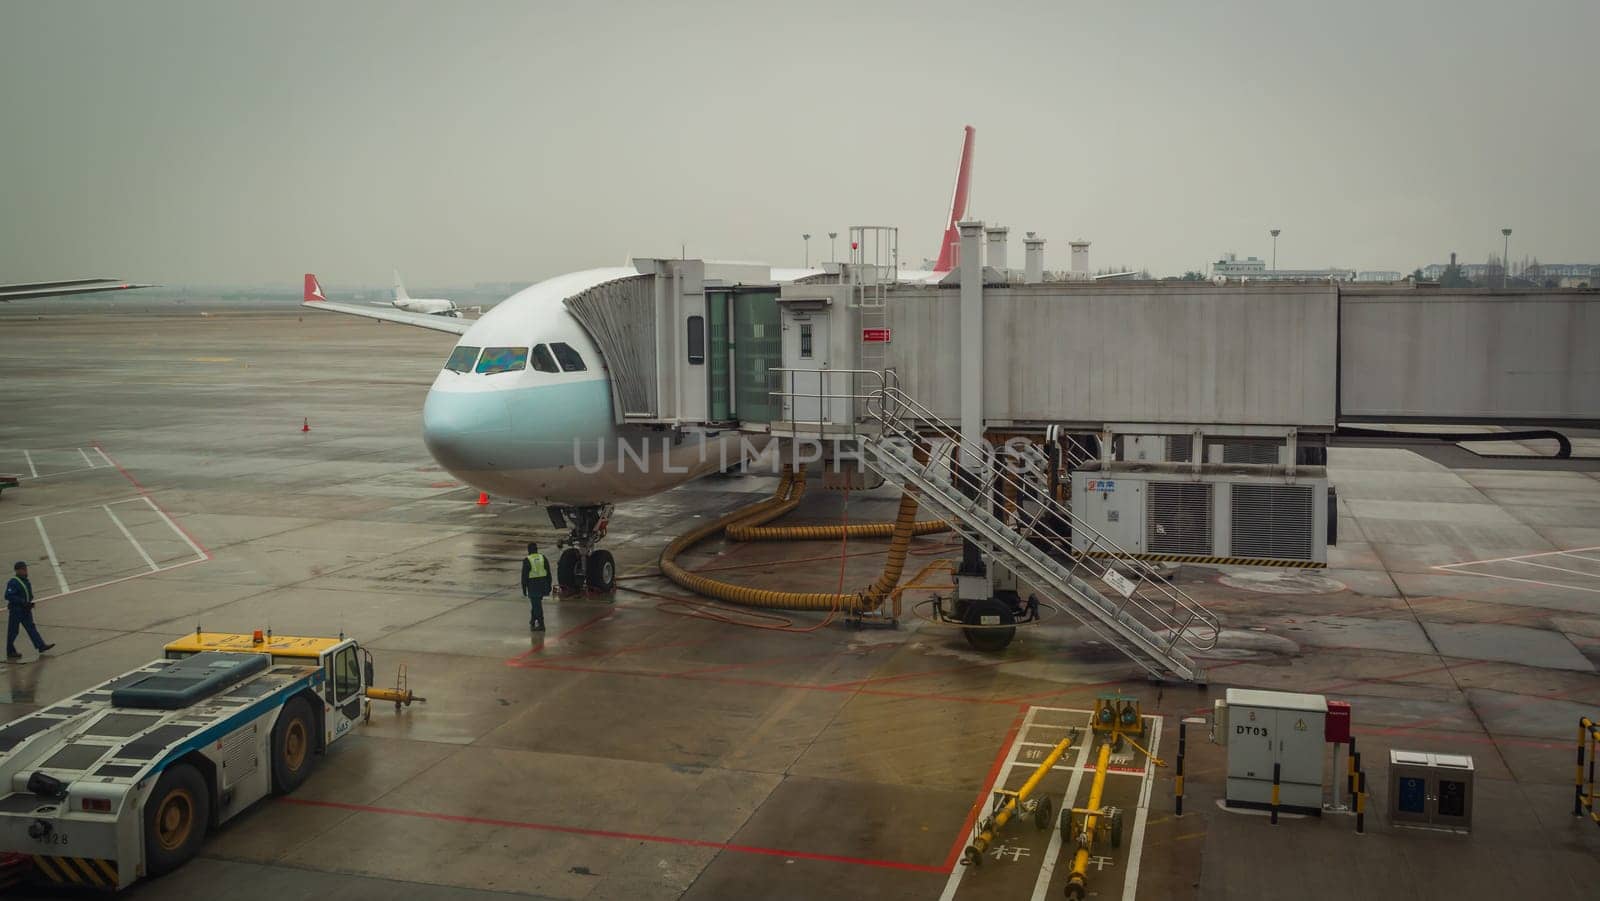 Shanghai, China - January 28, 2019: Airplane ready for boarding in Shanghai airport hub on rainy day by Busker